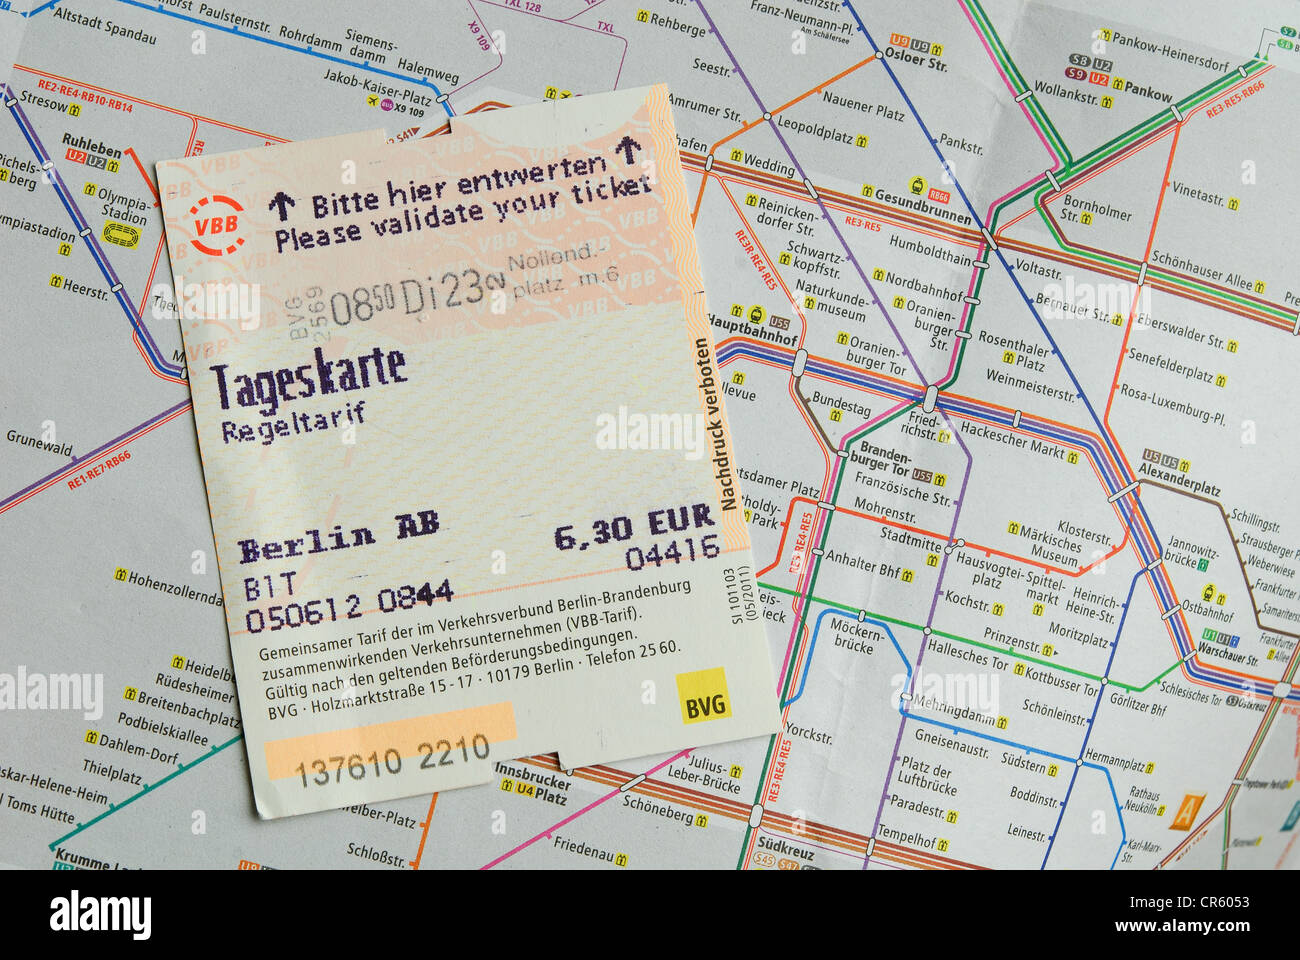 BERLIN, GERMANY. A validated tageskarte (travel card) on a map showing the Berlin U- and S-Bahn public transport system. 2012. Stock Photo